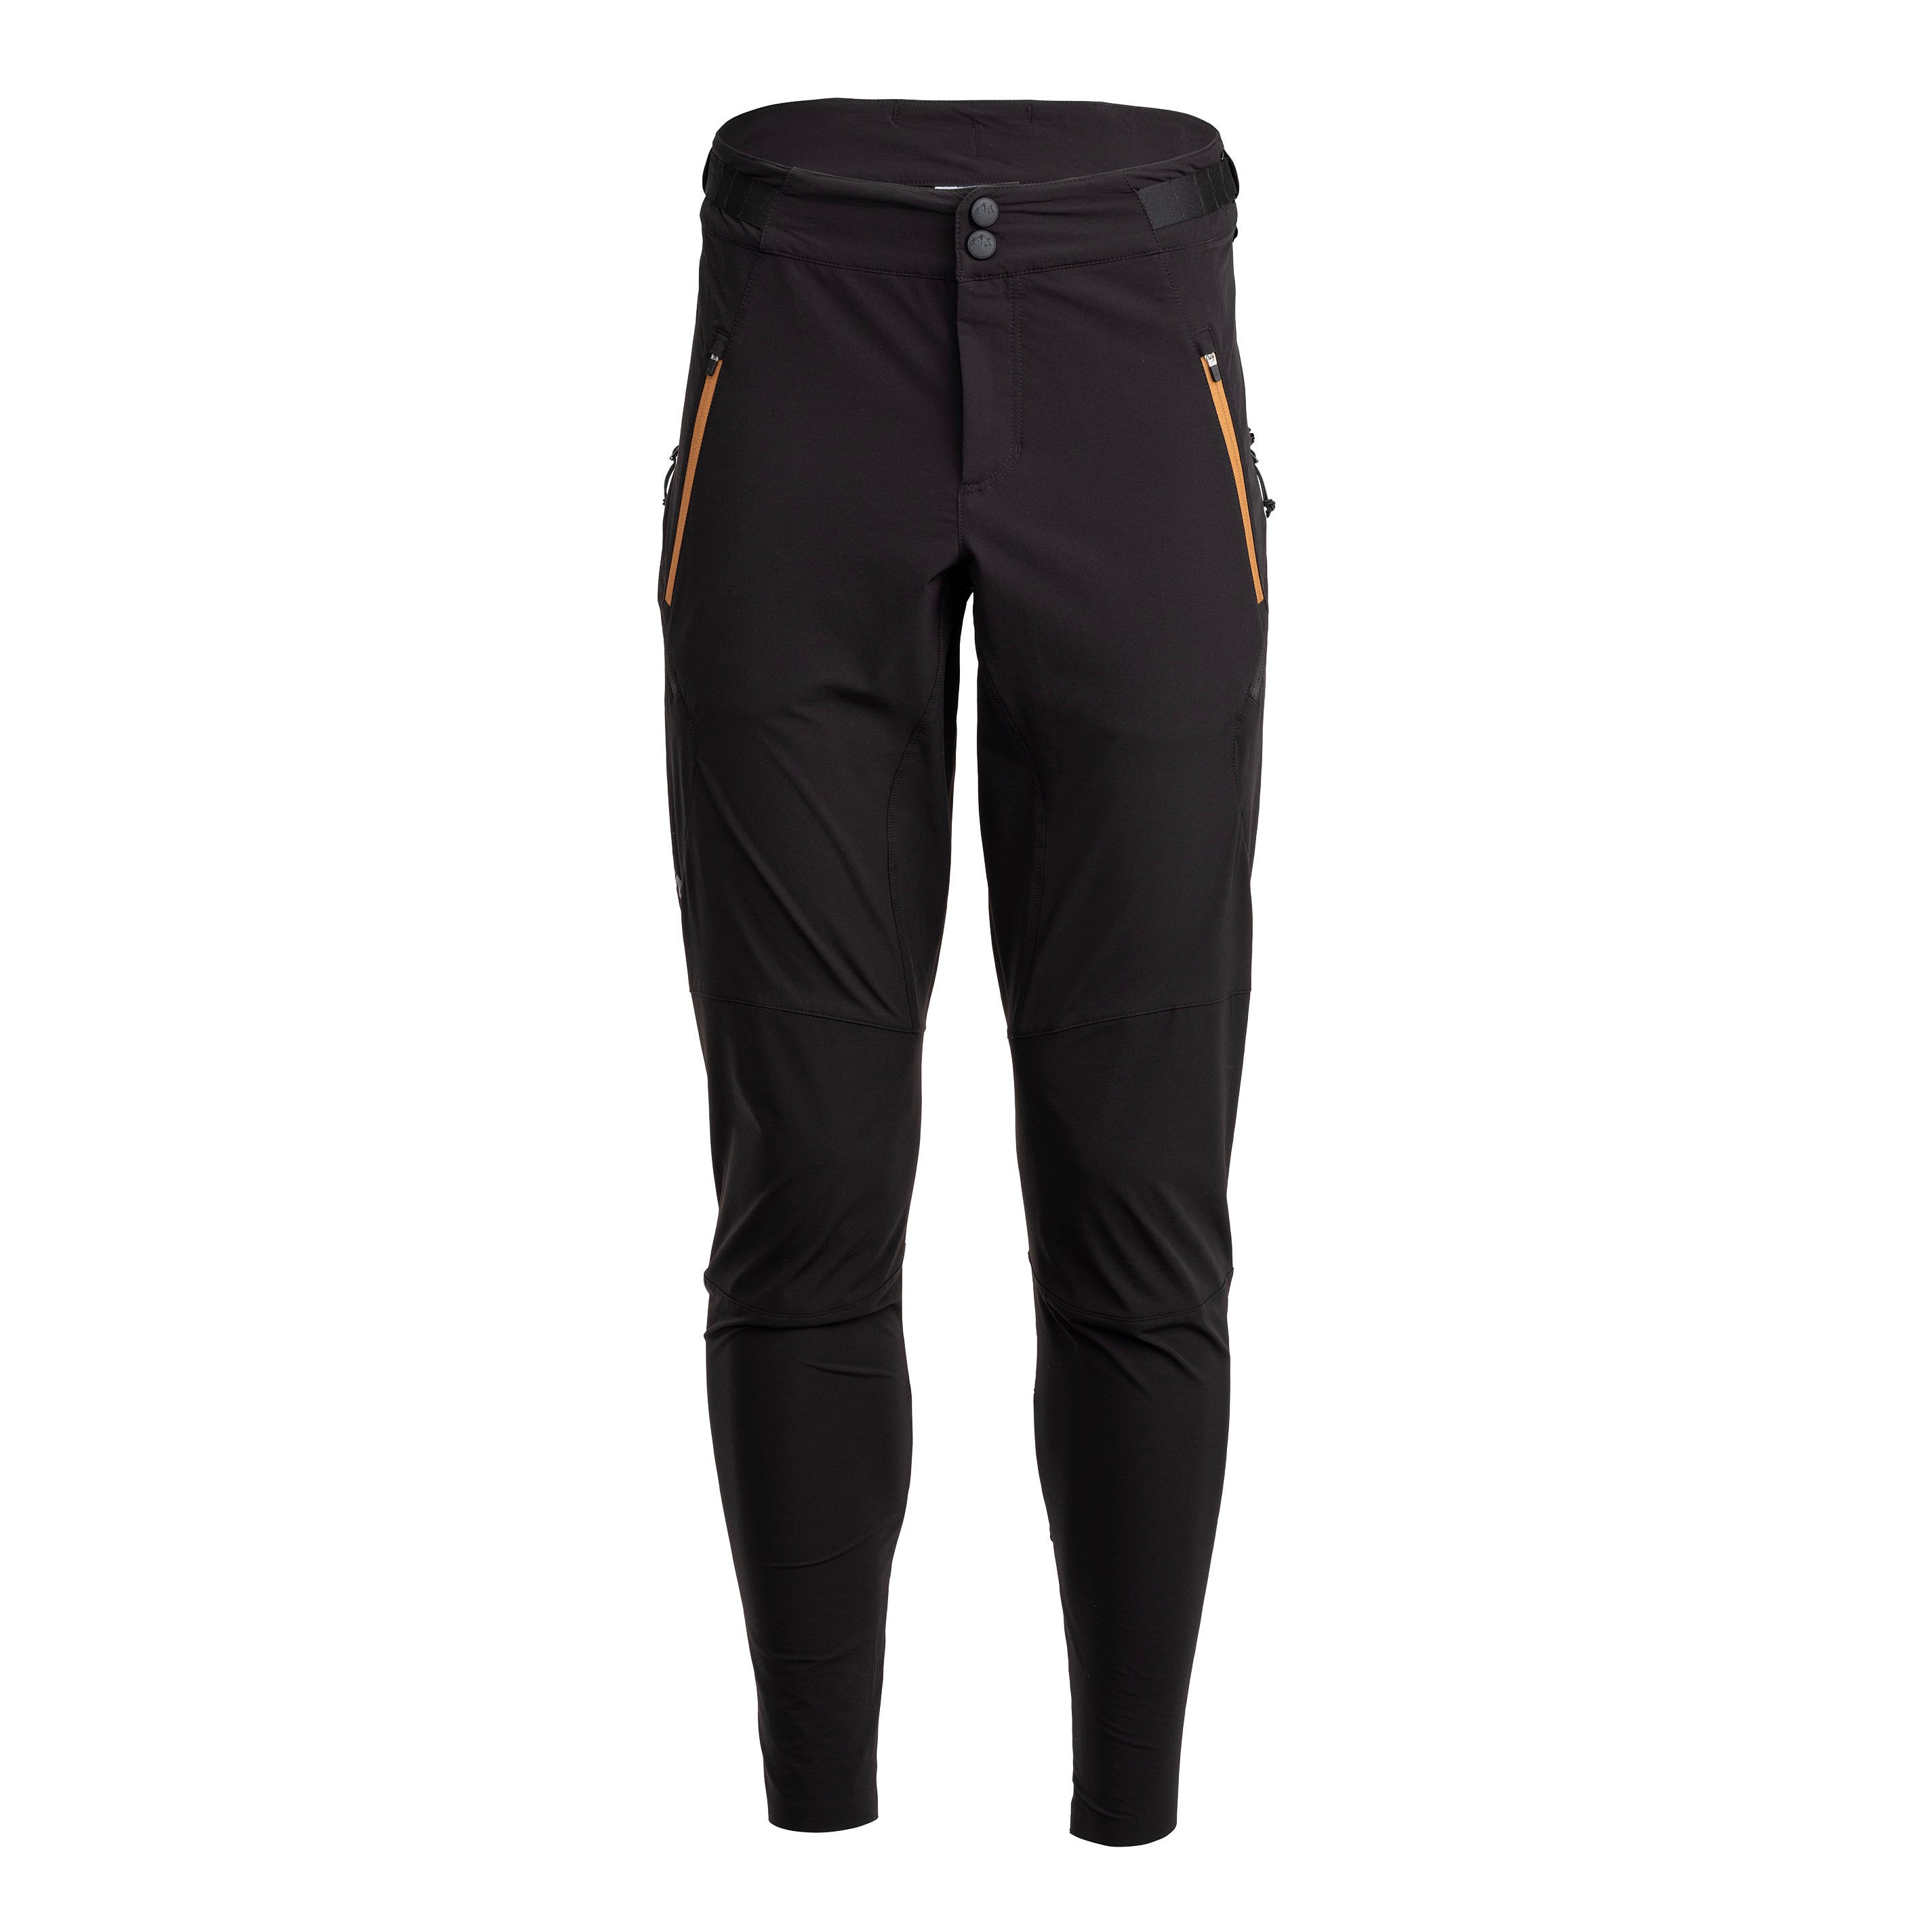 Shop Women Pants Online And Avail Offers Upto 85% Off